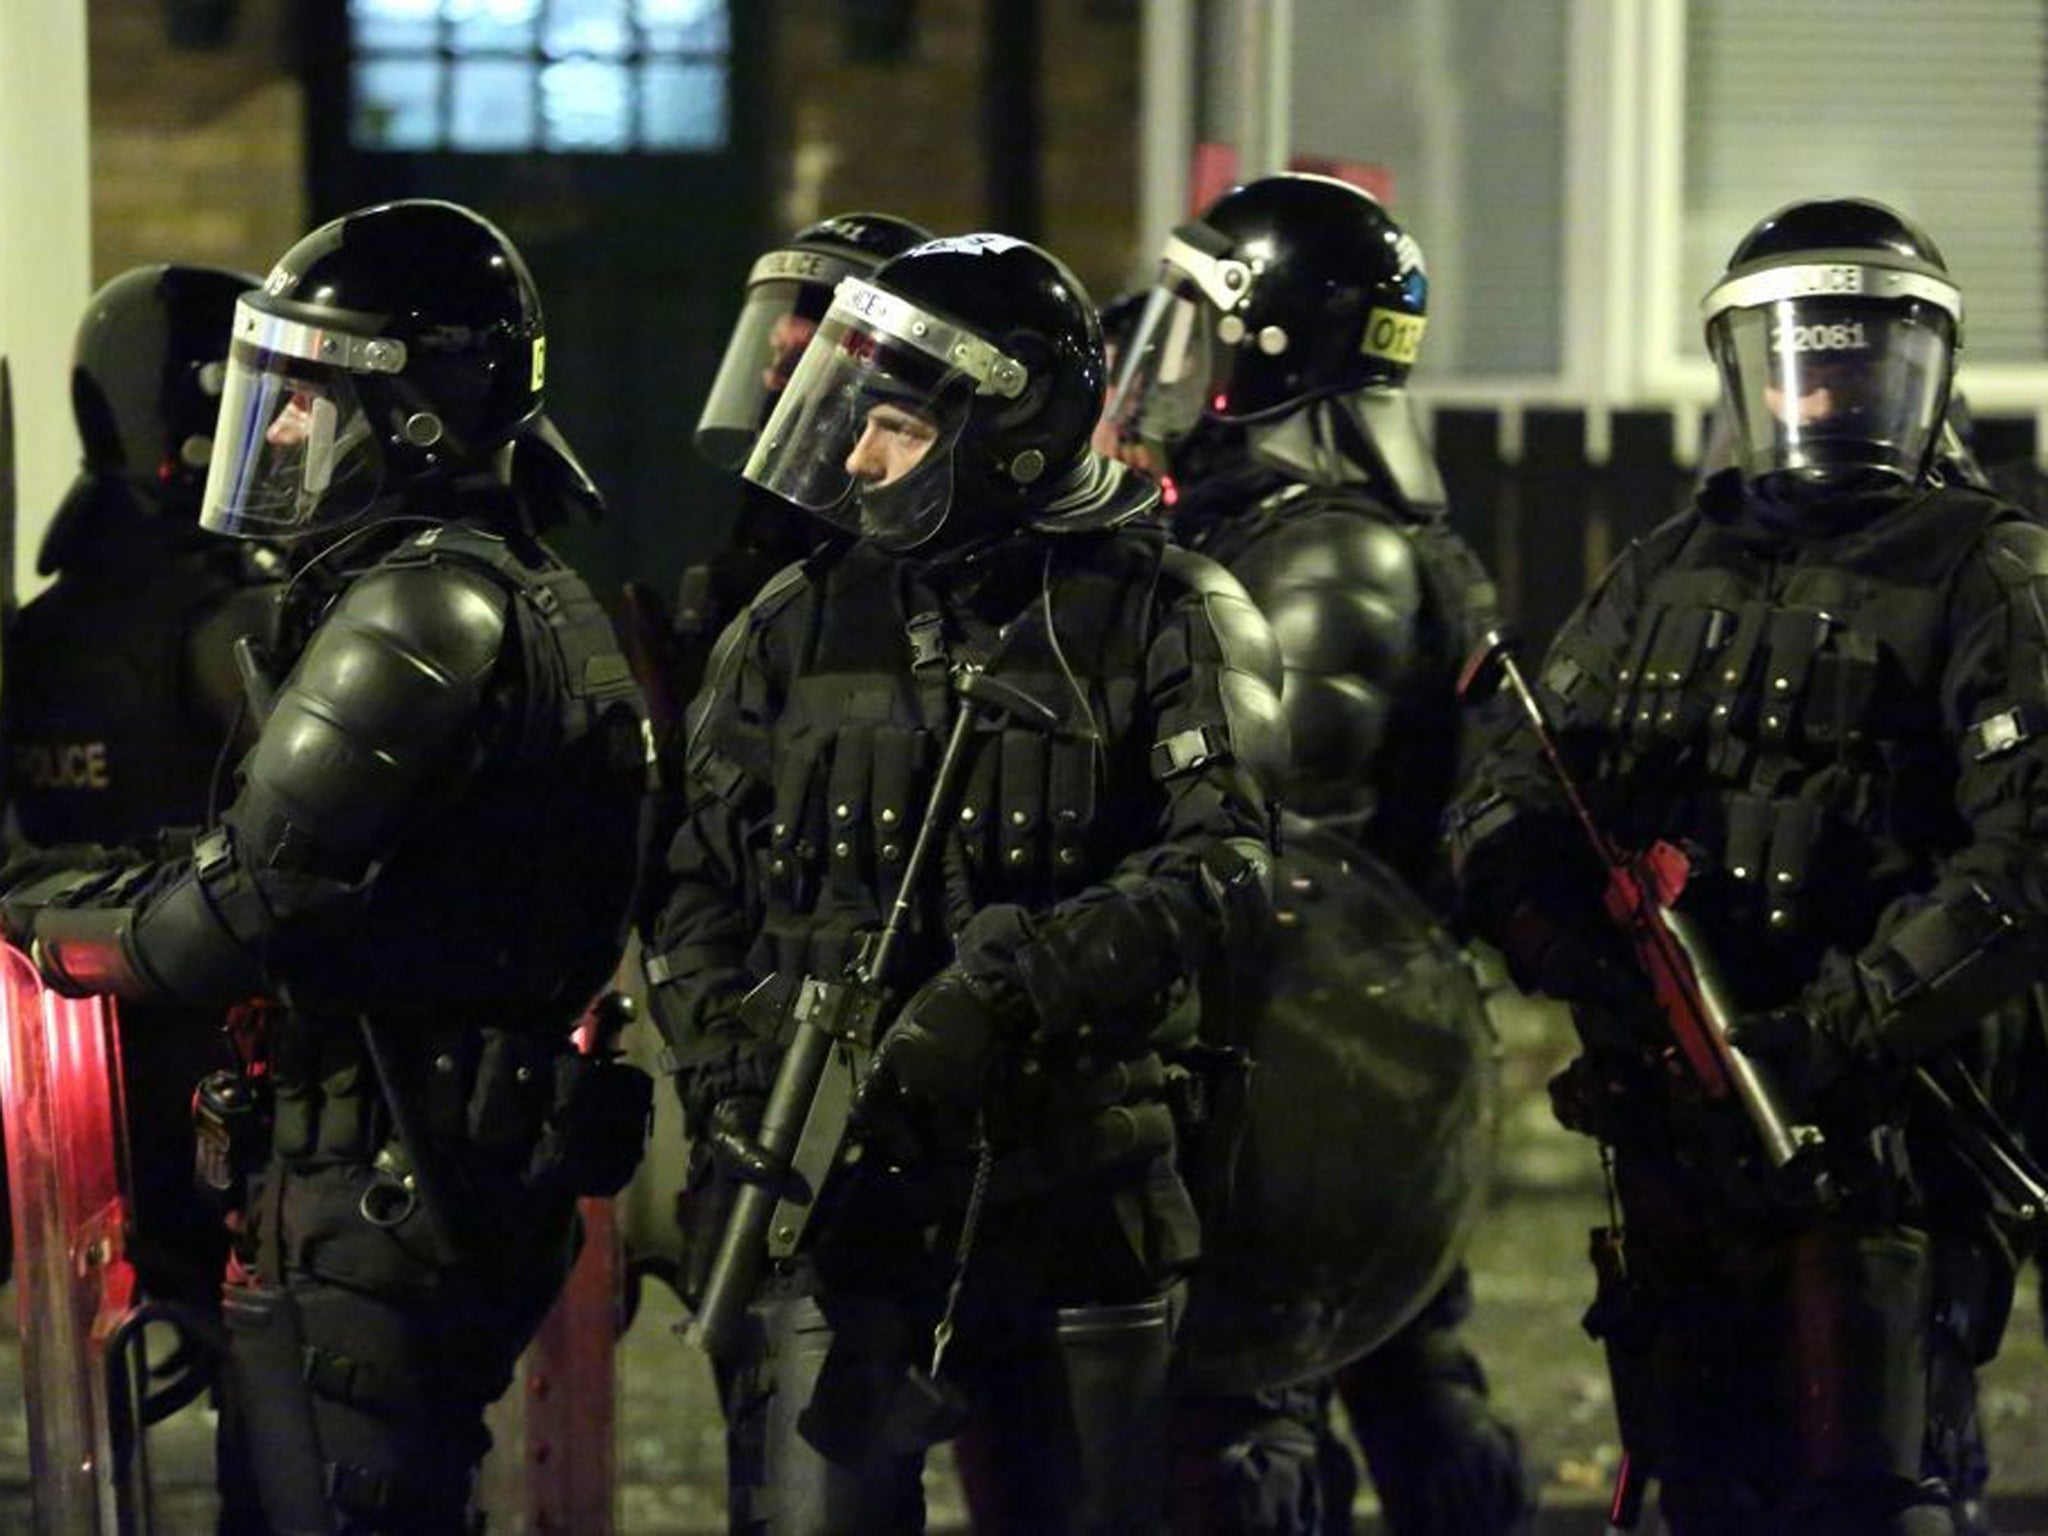 Four hundred extra police officers have been deployed in Northern Ireland